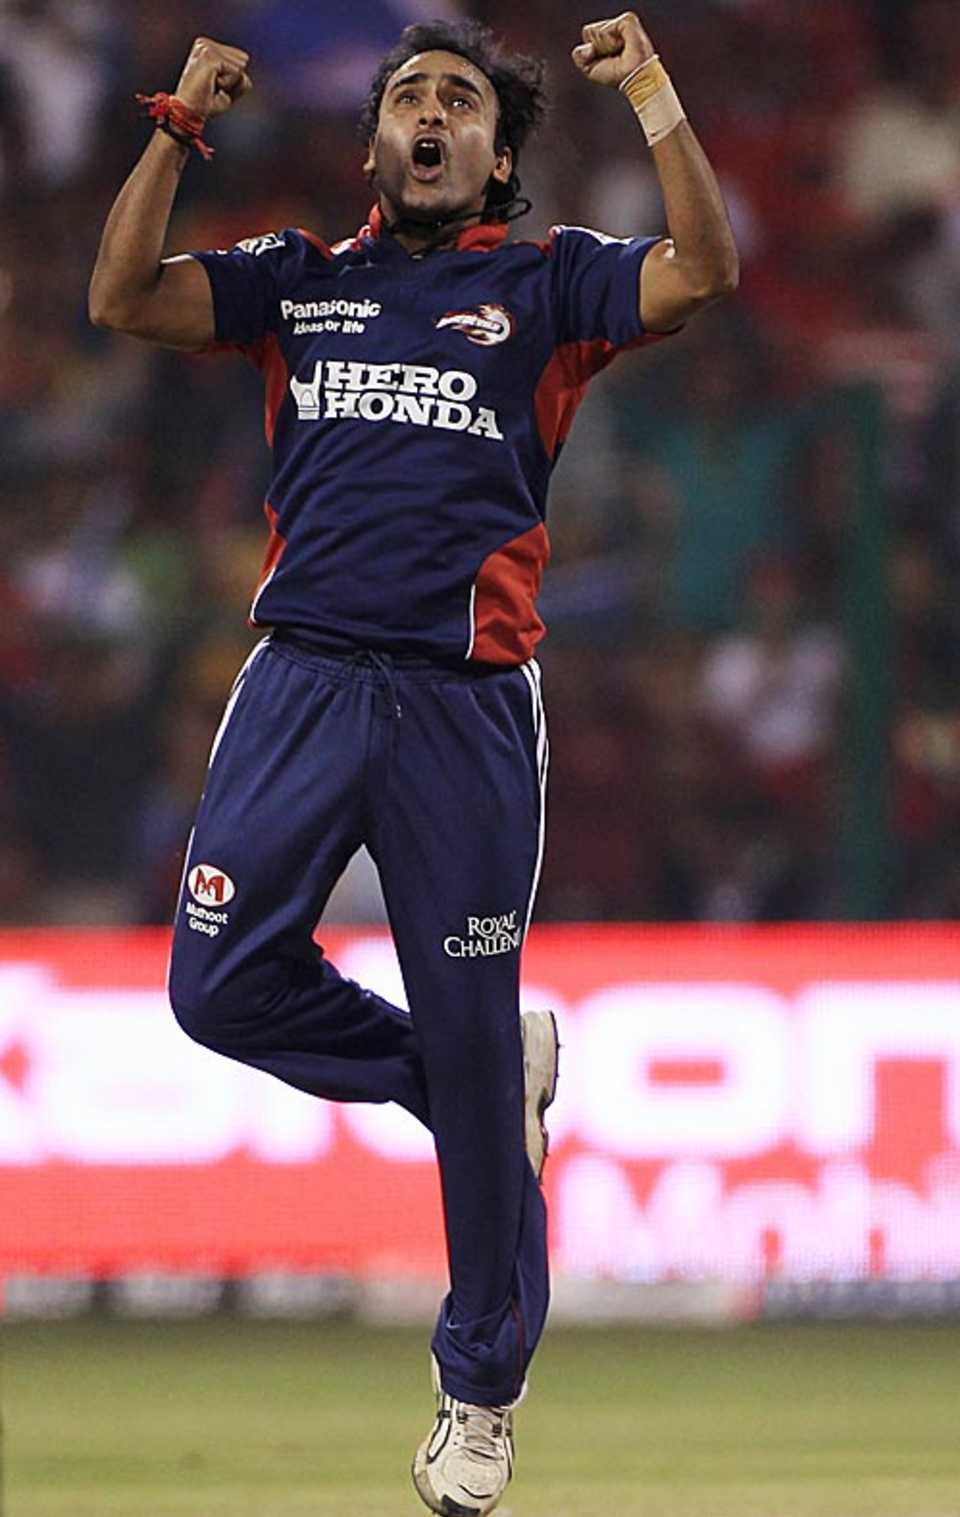 Amit Mishra bagged two crucial wickets to restrict Royal Challengers Bangalore in their chase